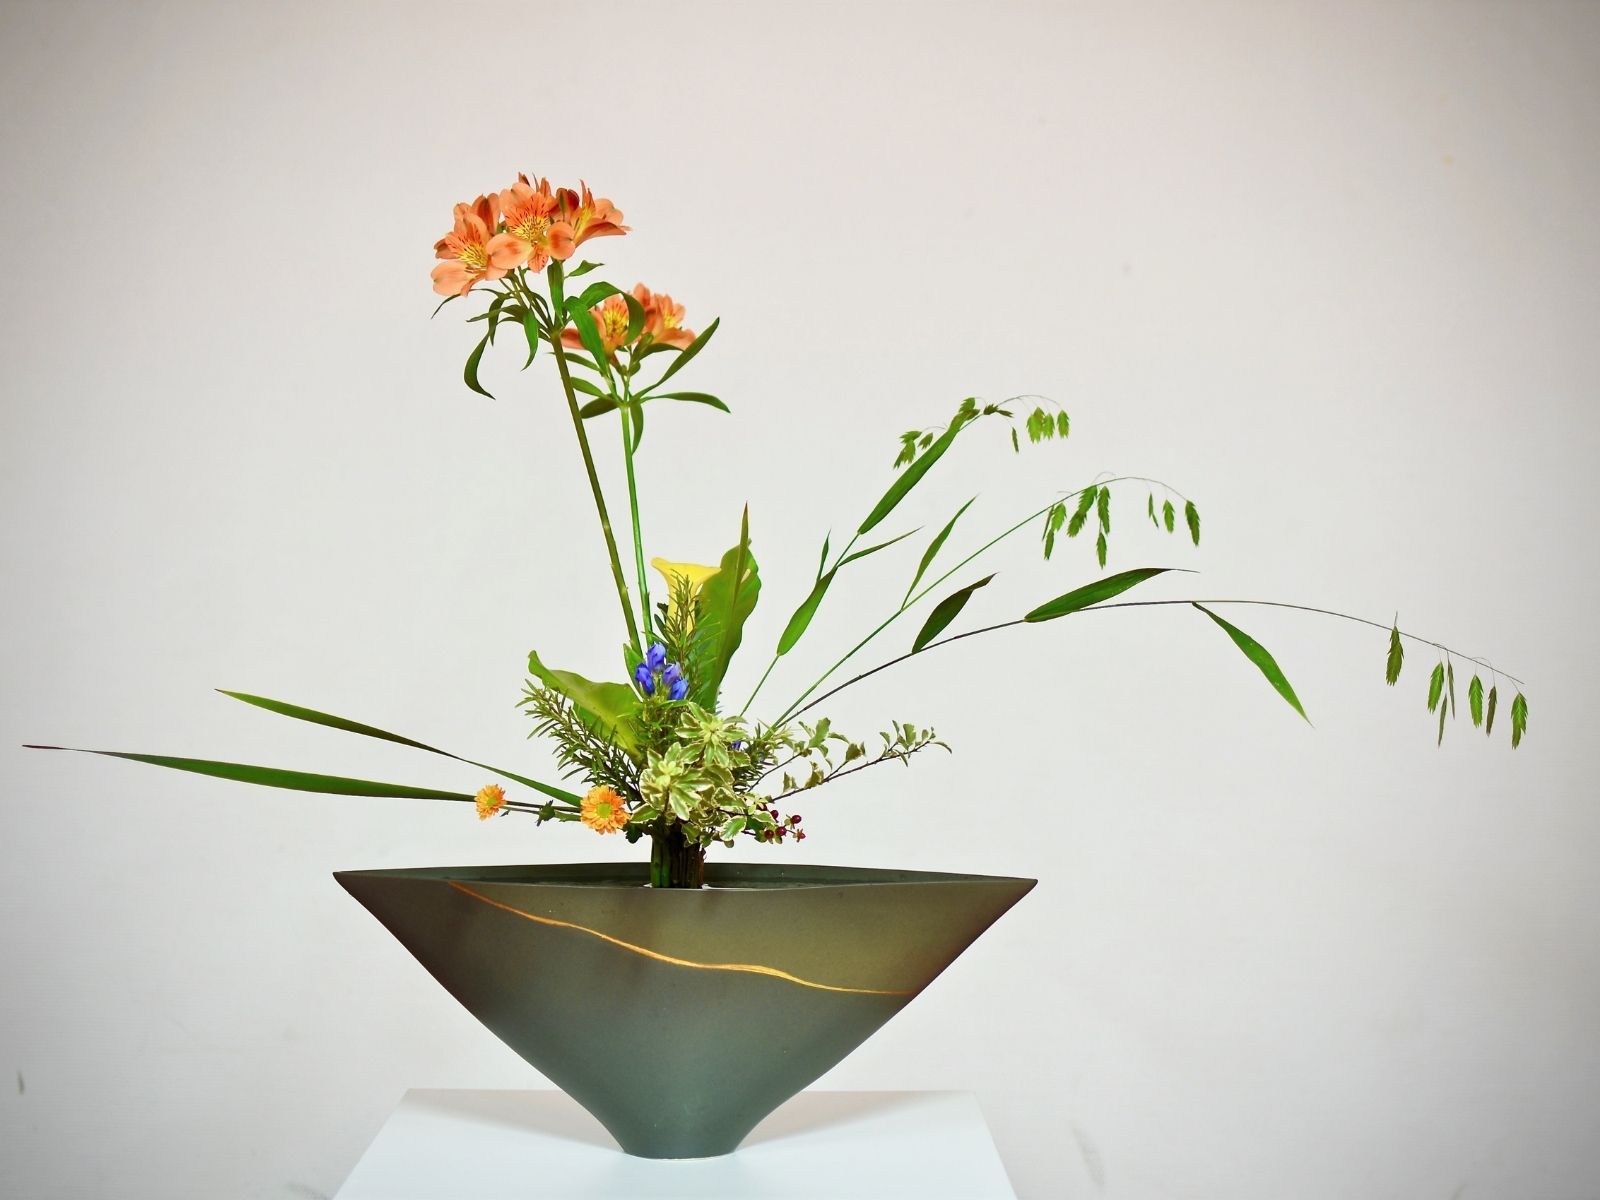 Els and her passion about Ikenobo, the heart of Ikebana on Thursd